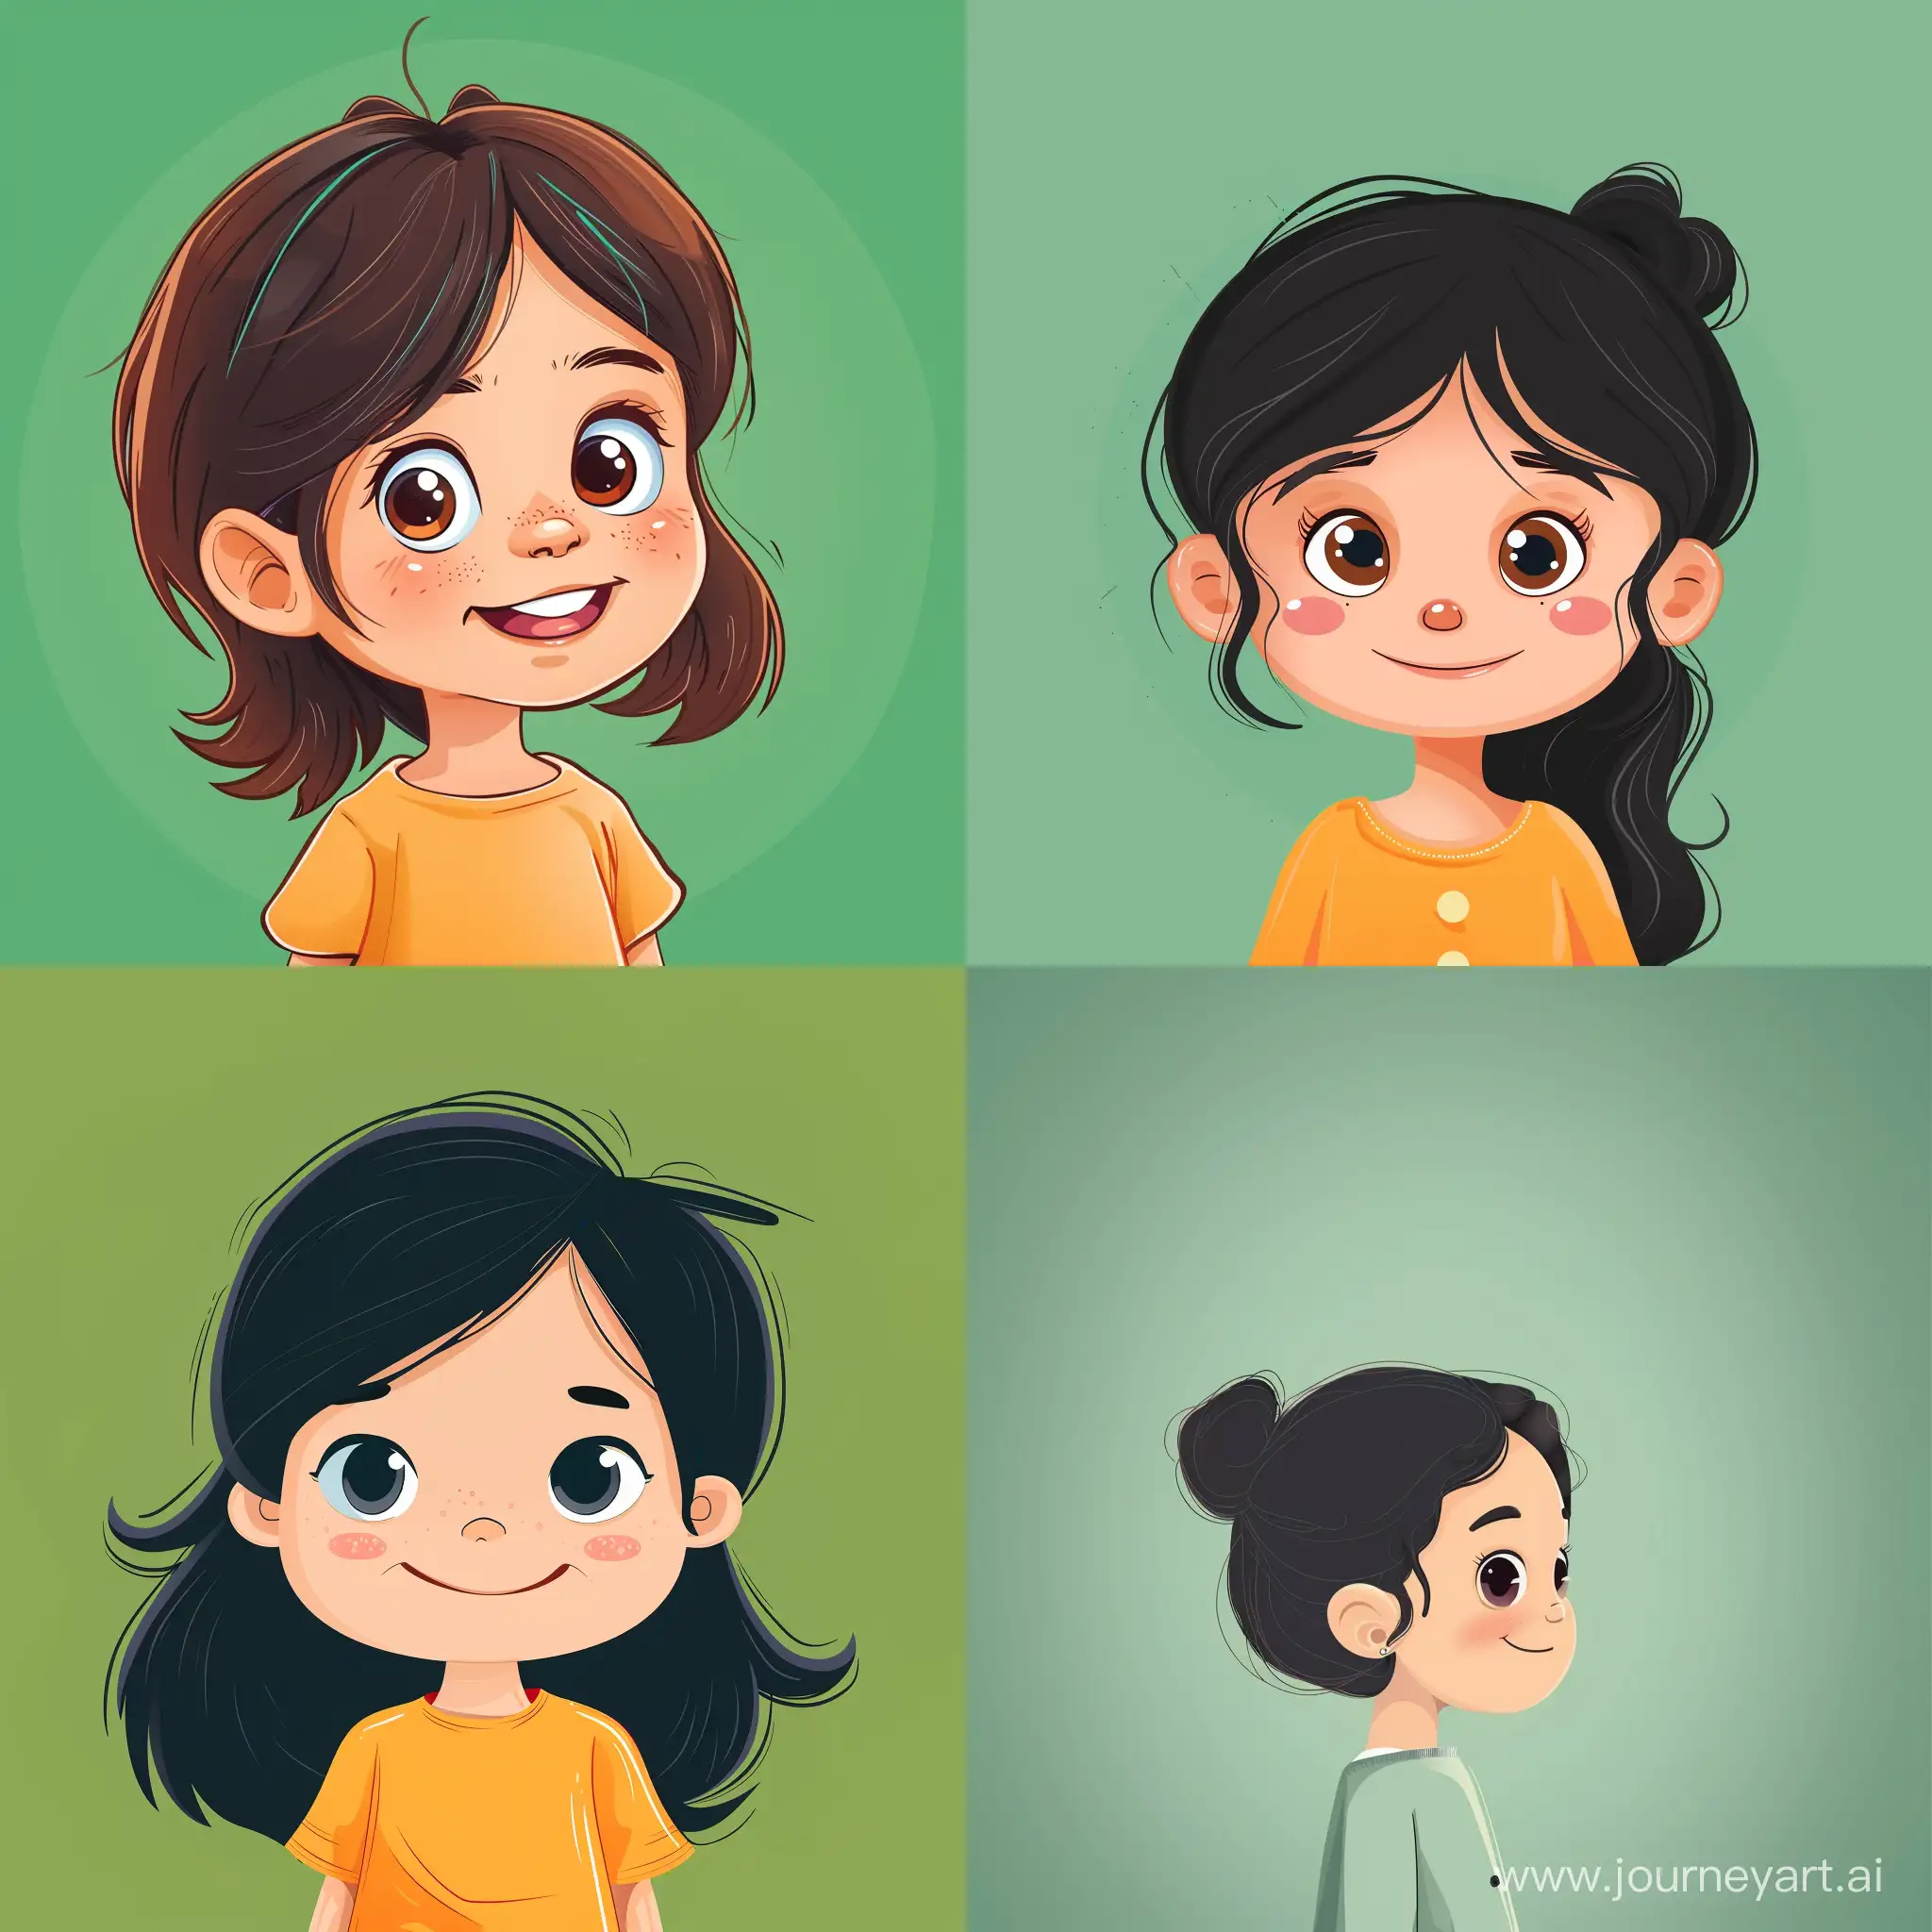 A little Girl with Cheerful Expression, Simple Green Background, Adobe Illustrator Software, High Precision --v 6.0 --s 100